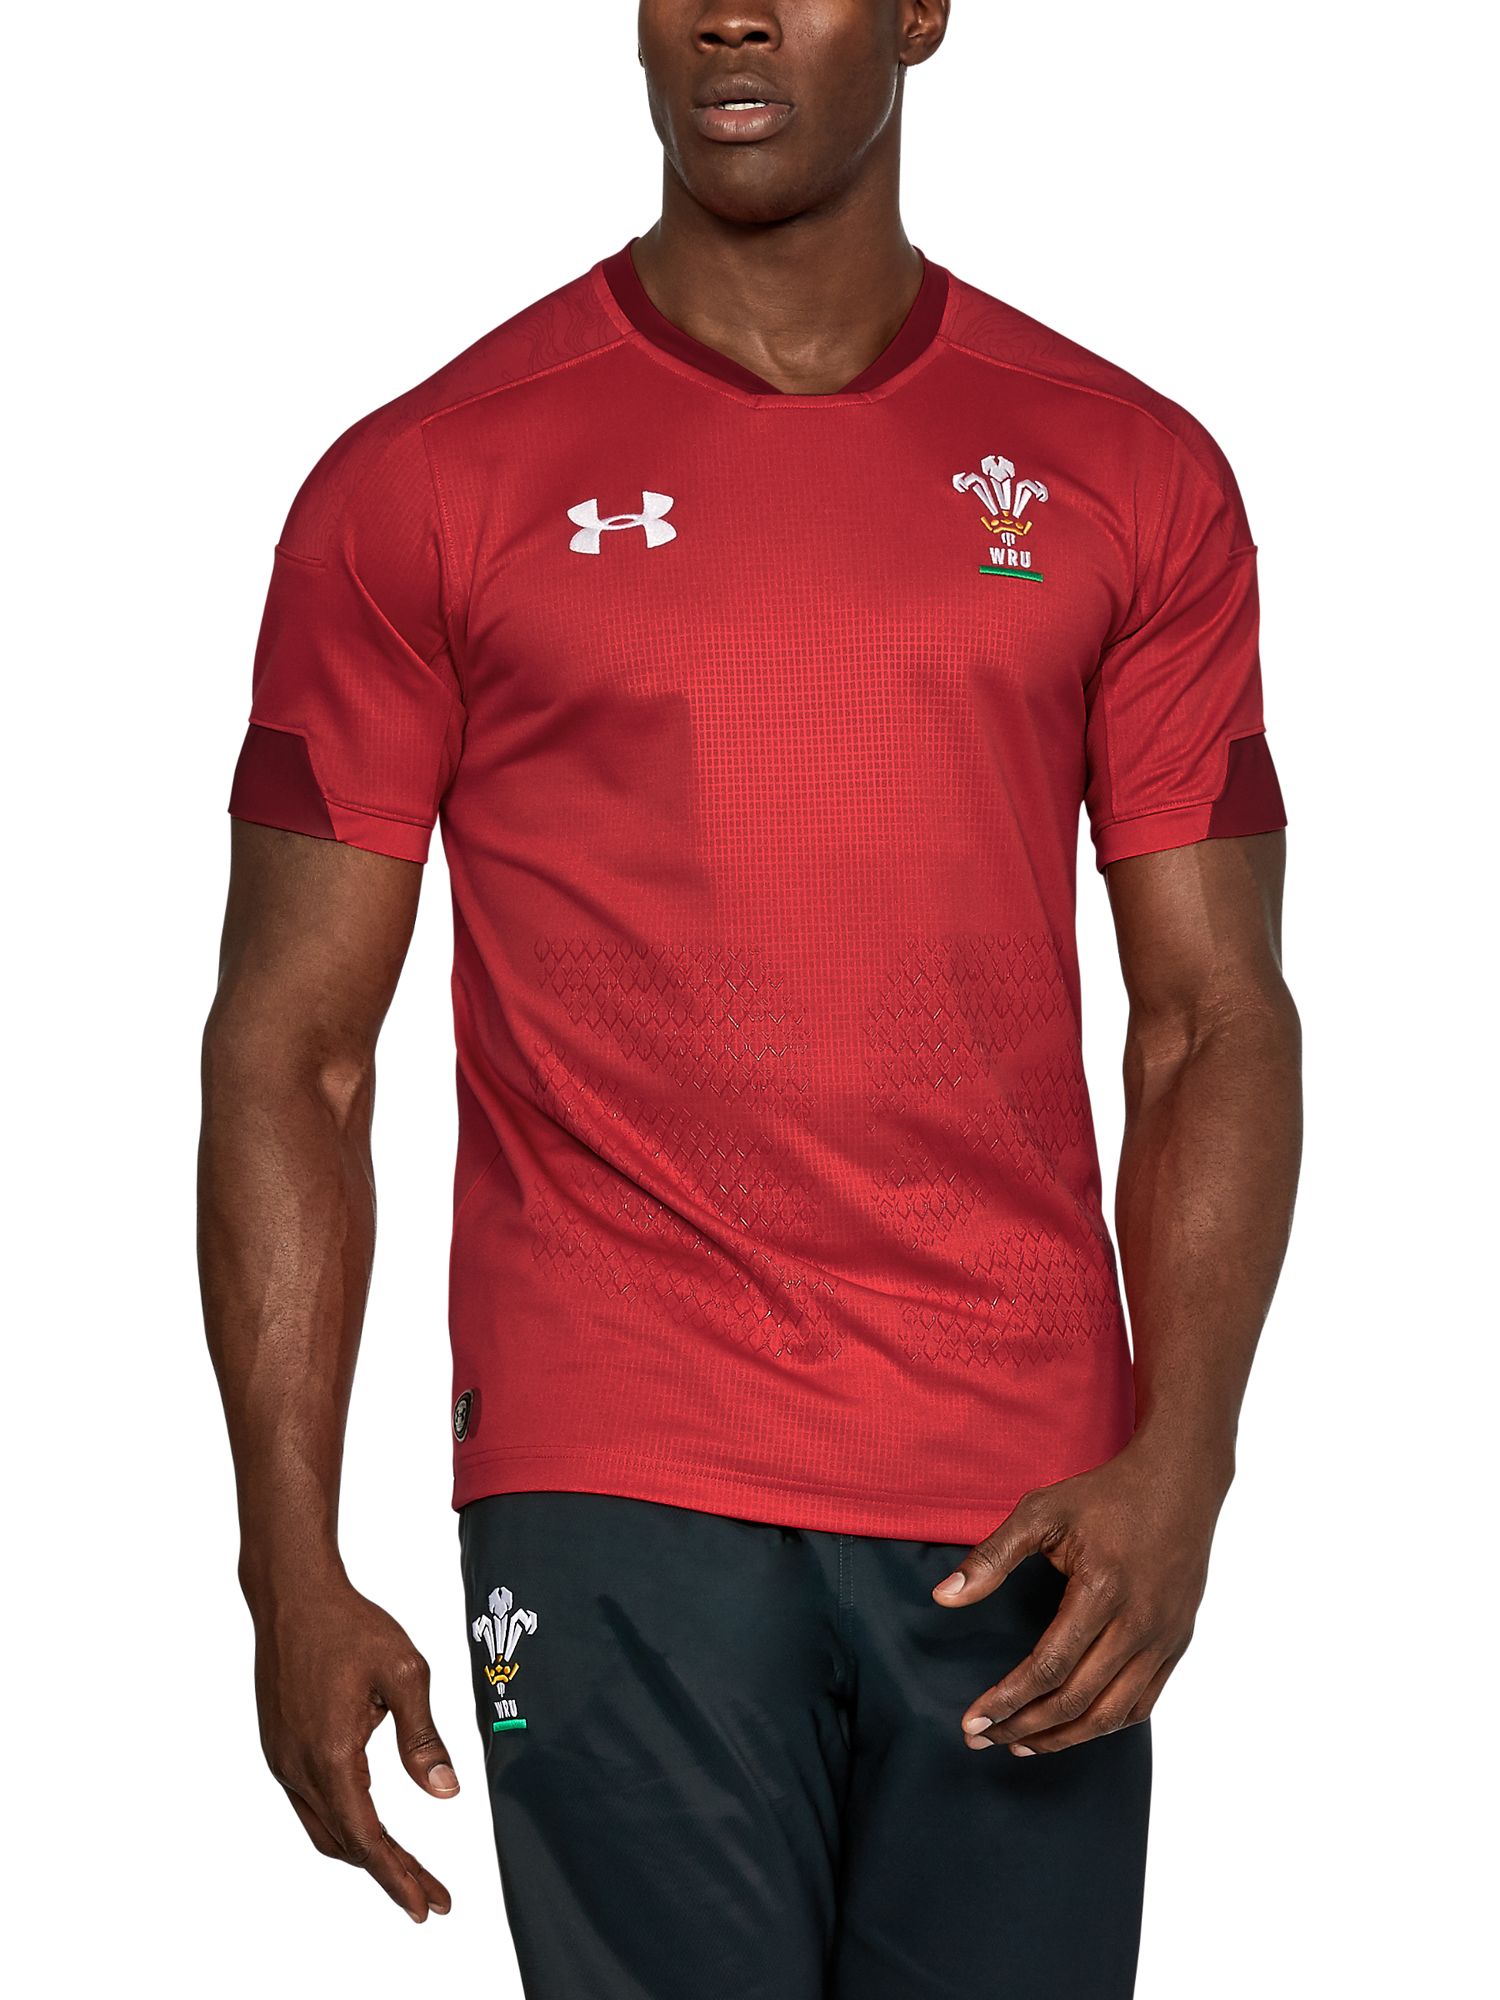 under armour wales rugby